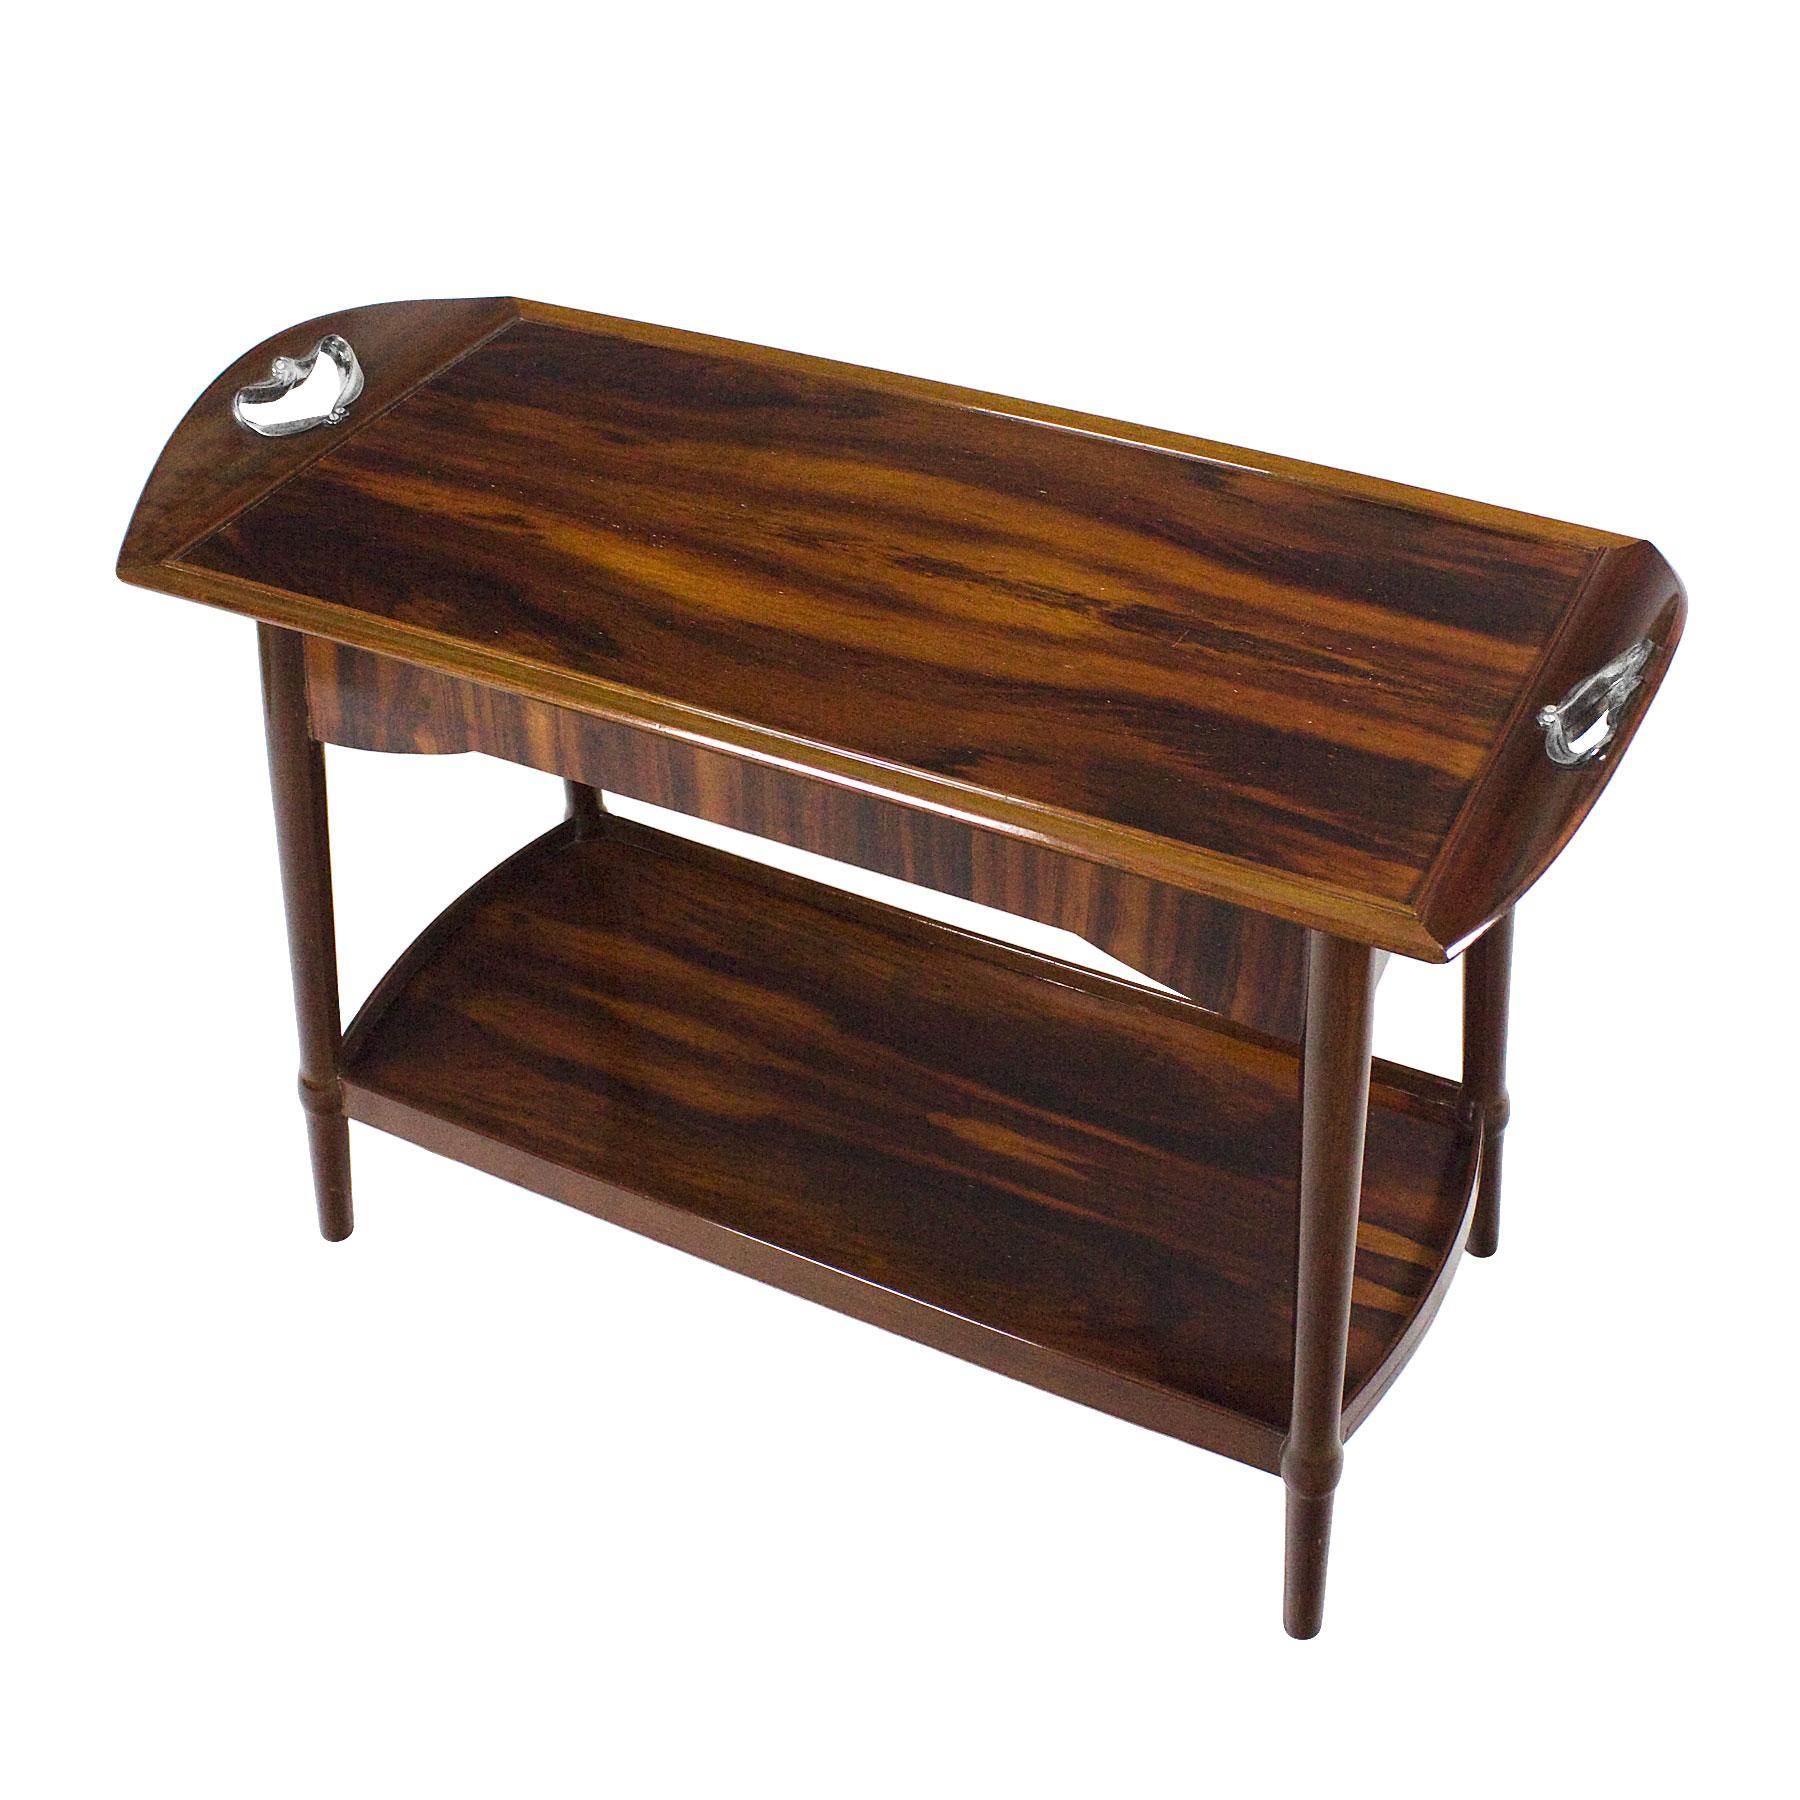 Early 20th Century 1900s Art Nouveau Dessert Table, Mahogany, Removable Tray - France For Sale